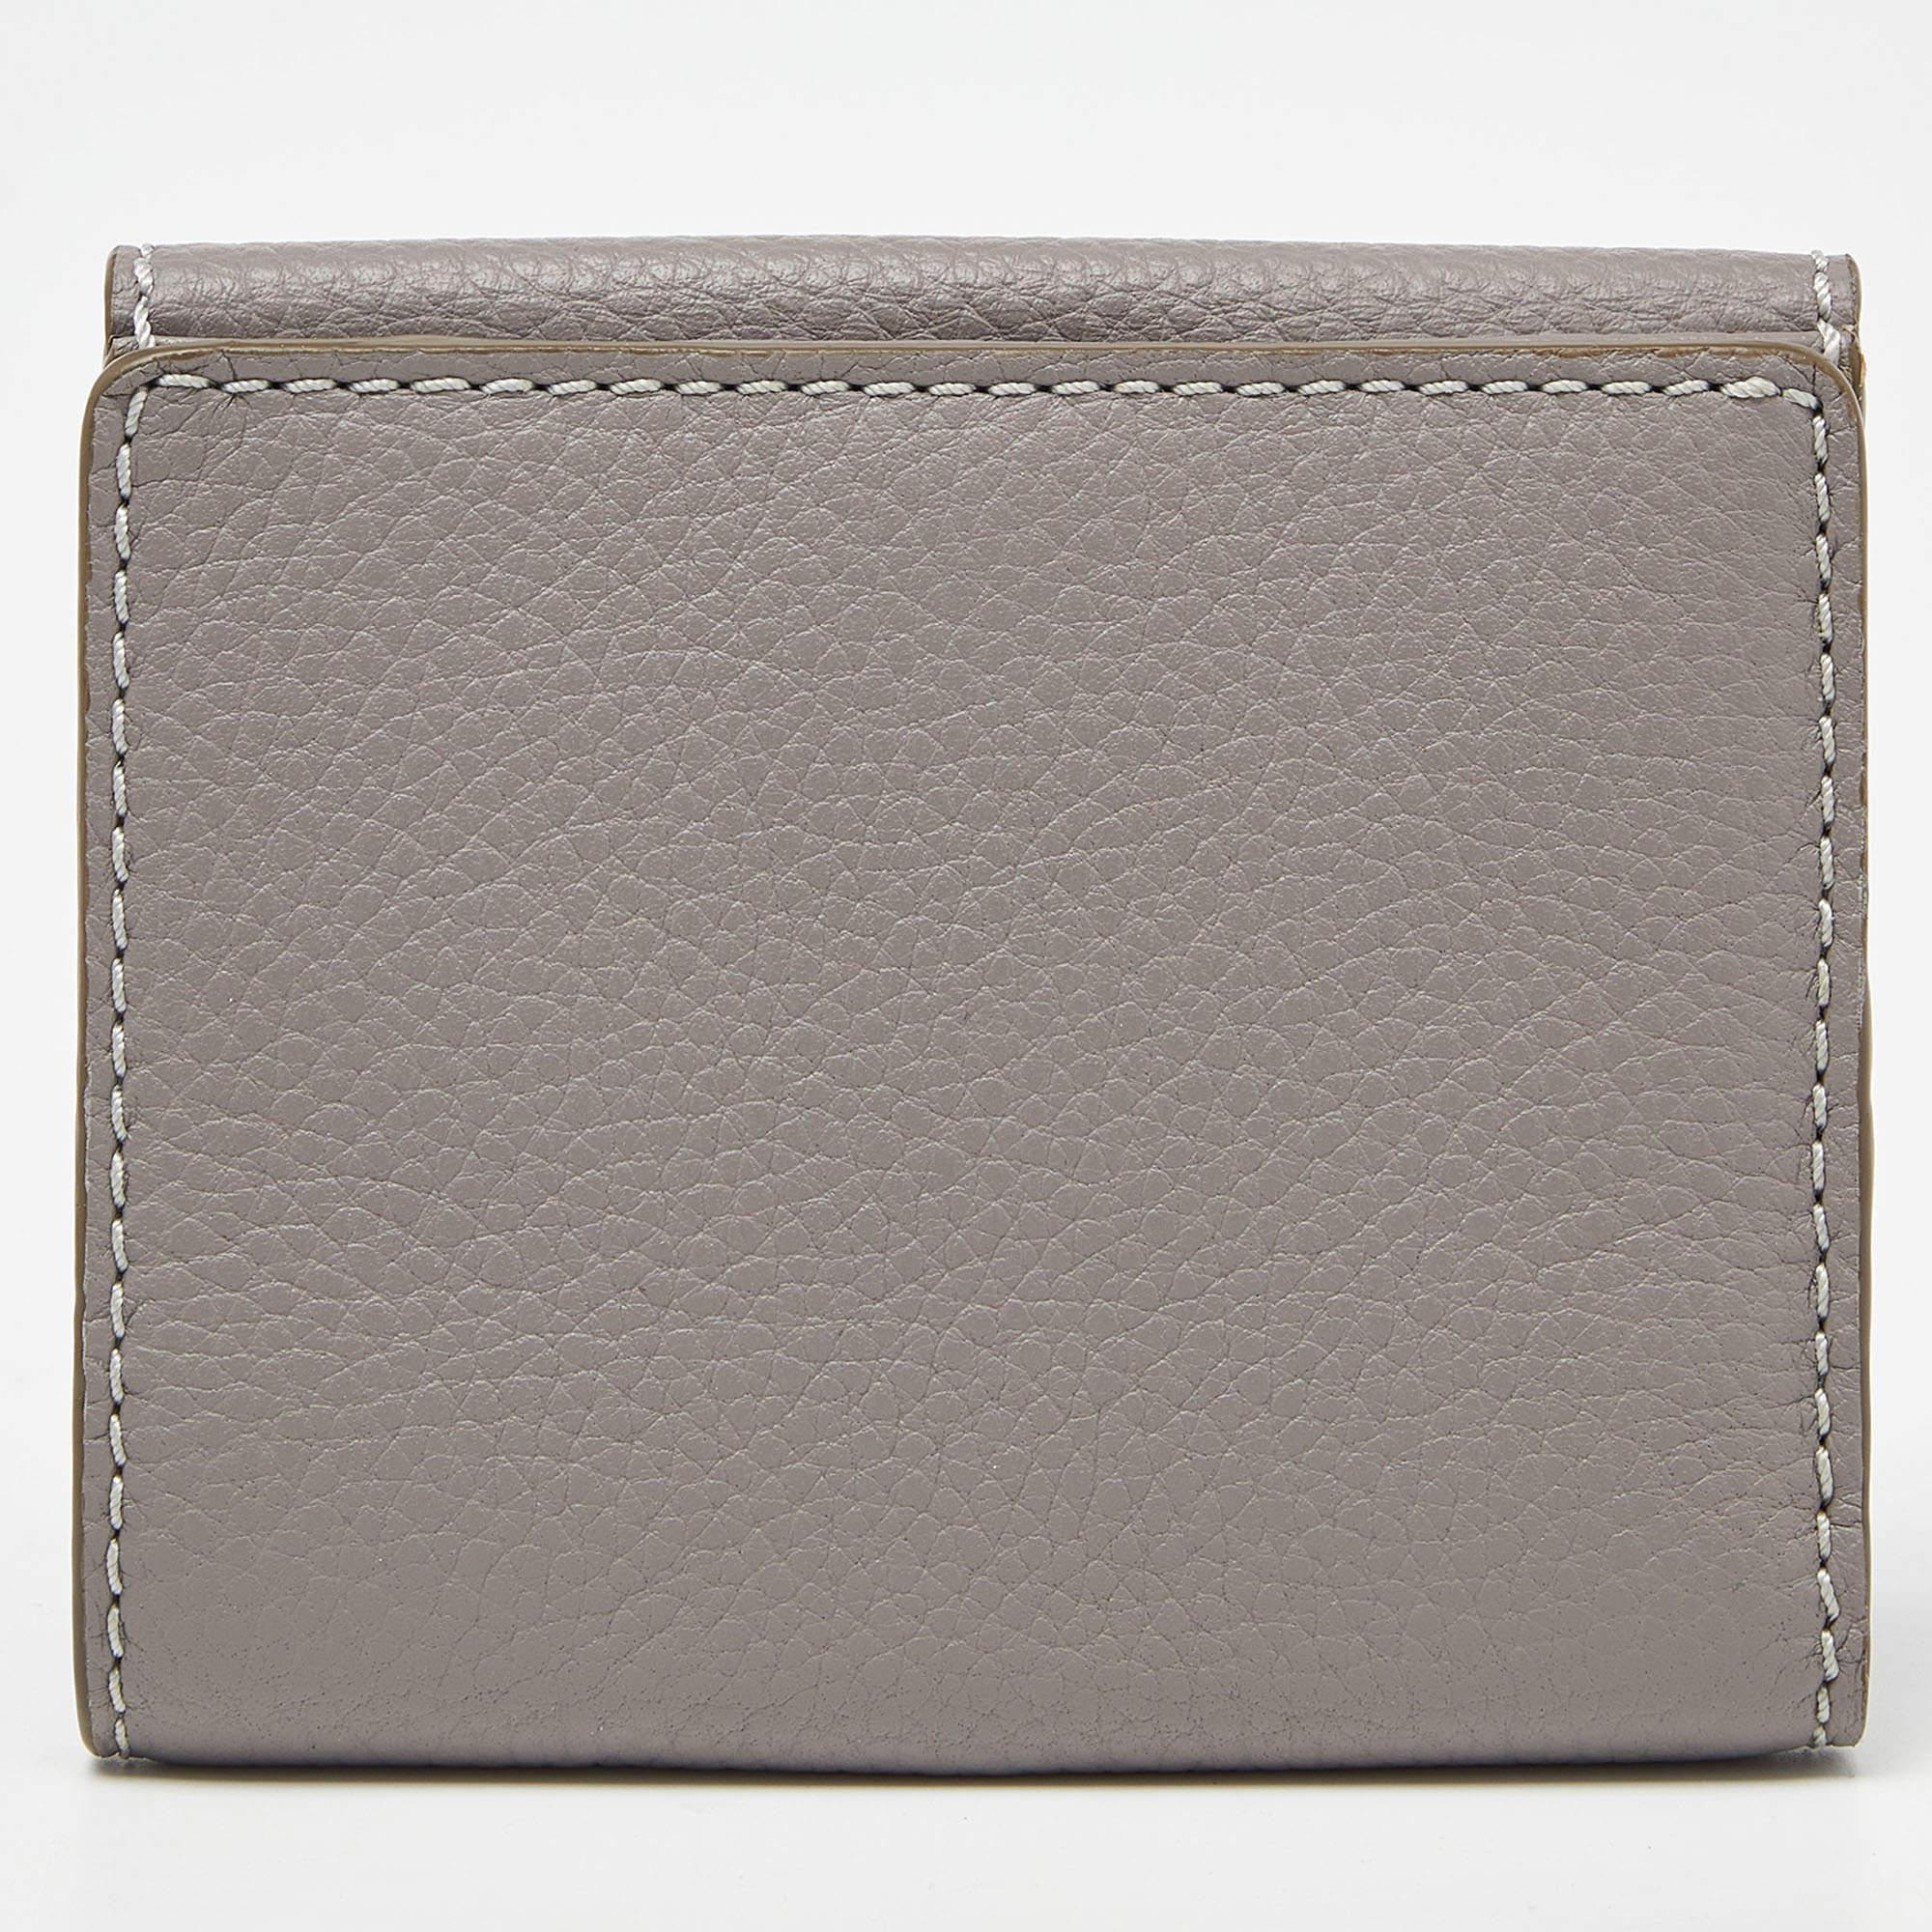 Chloe Grey Leather Marcie Compact Wallet 4